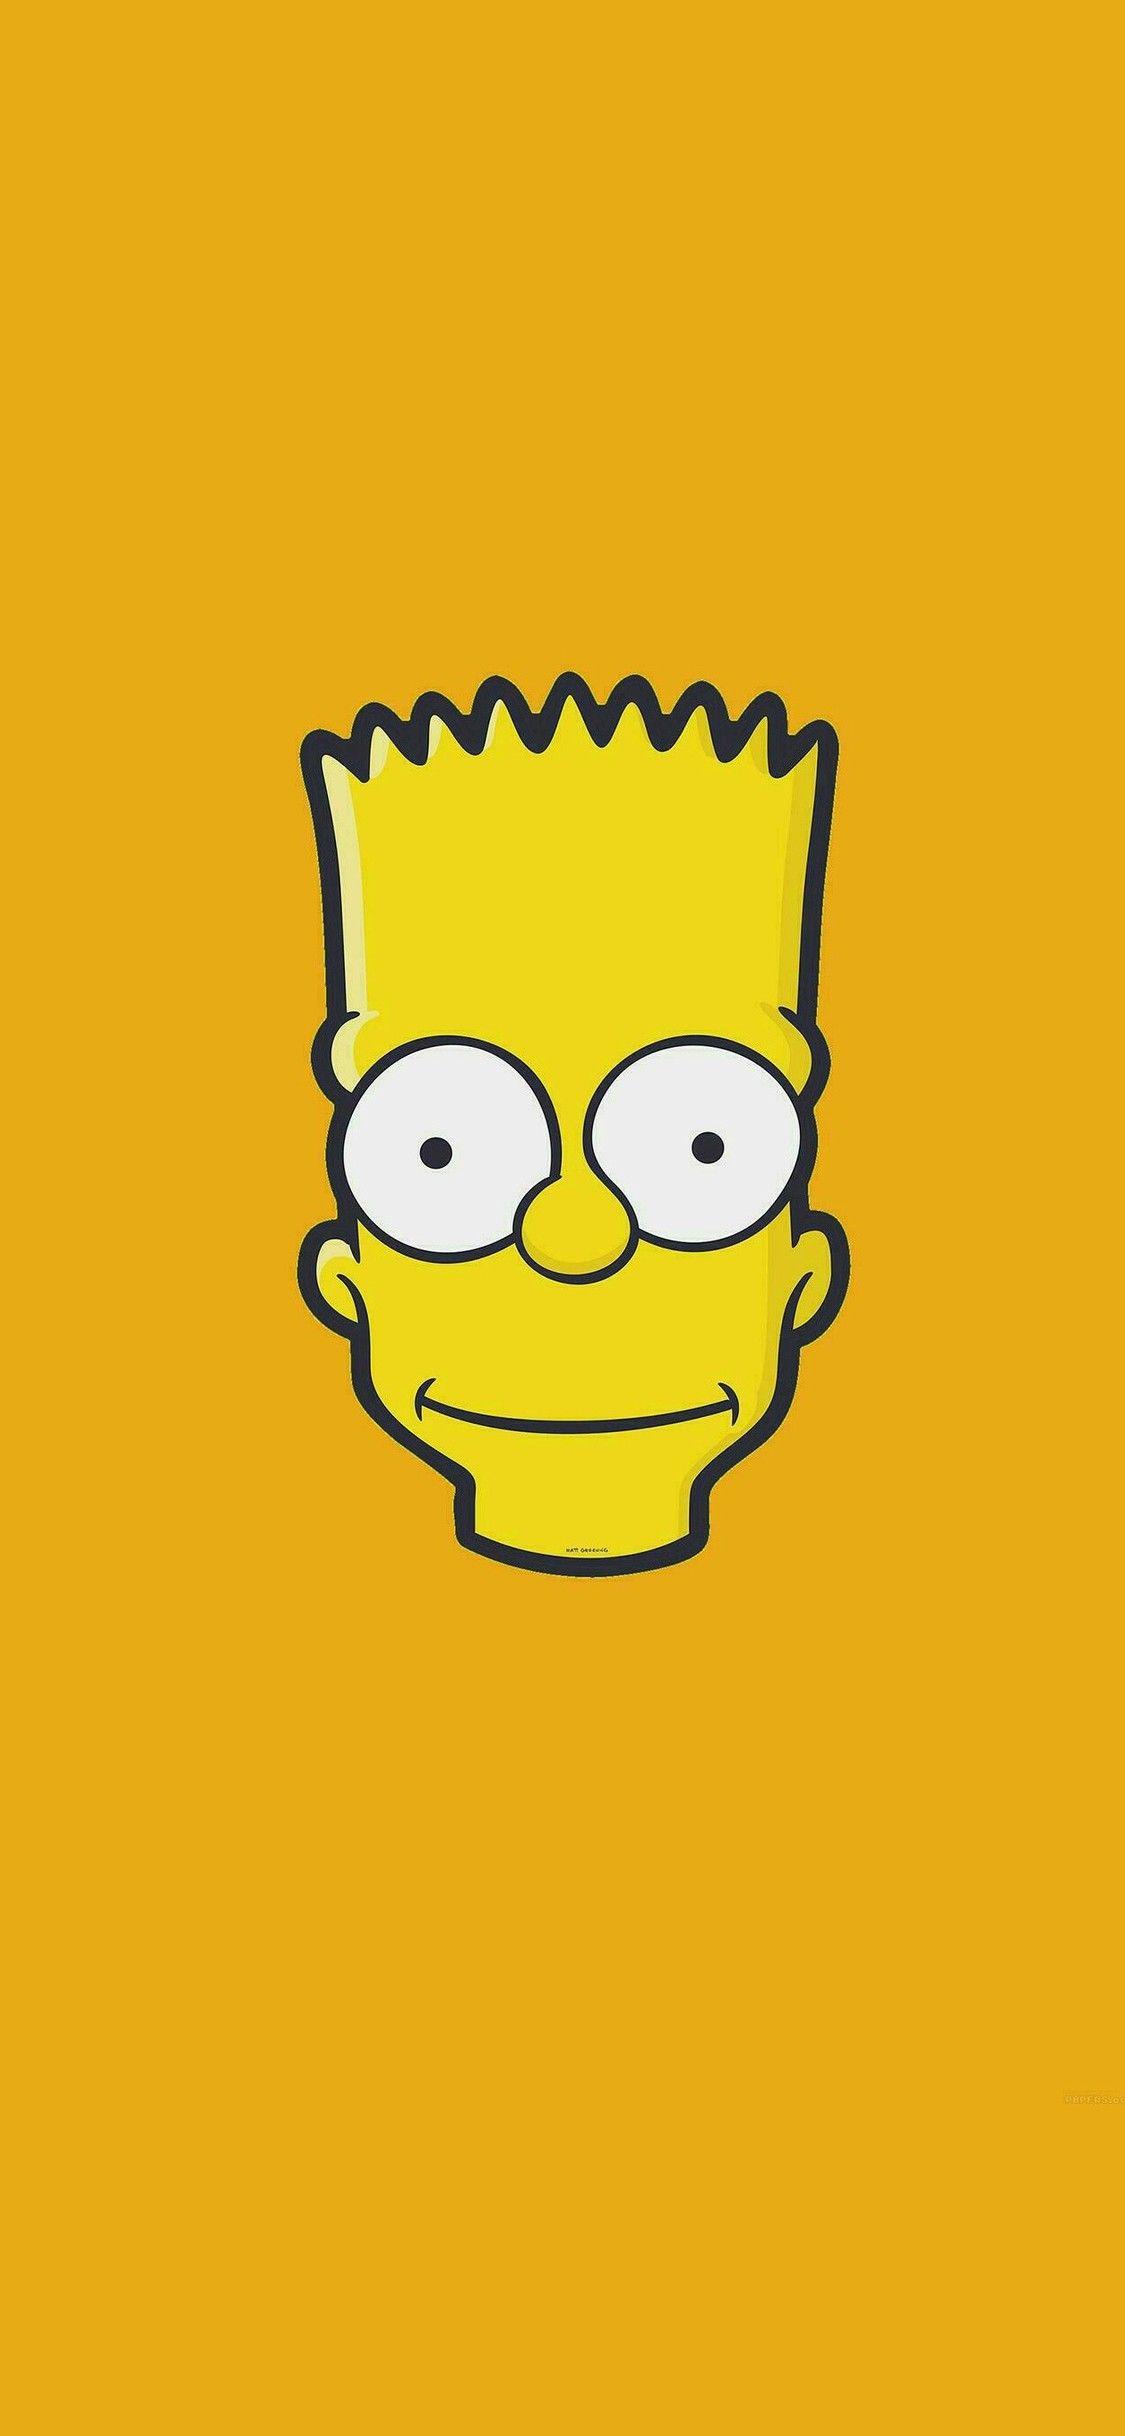 Simpsons iPhone Wallpaper Free Simpsons iPhone Background